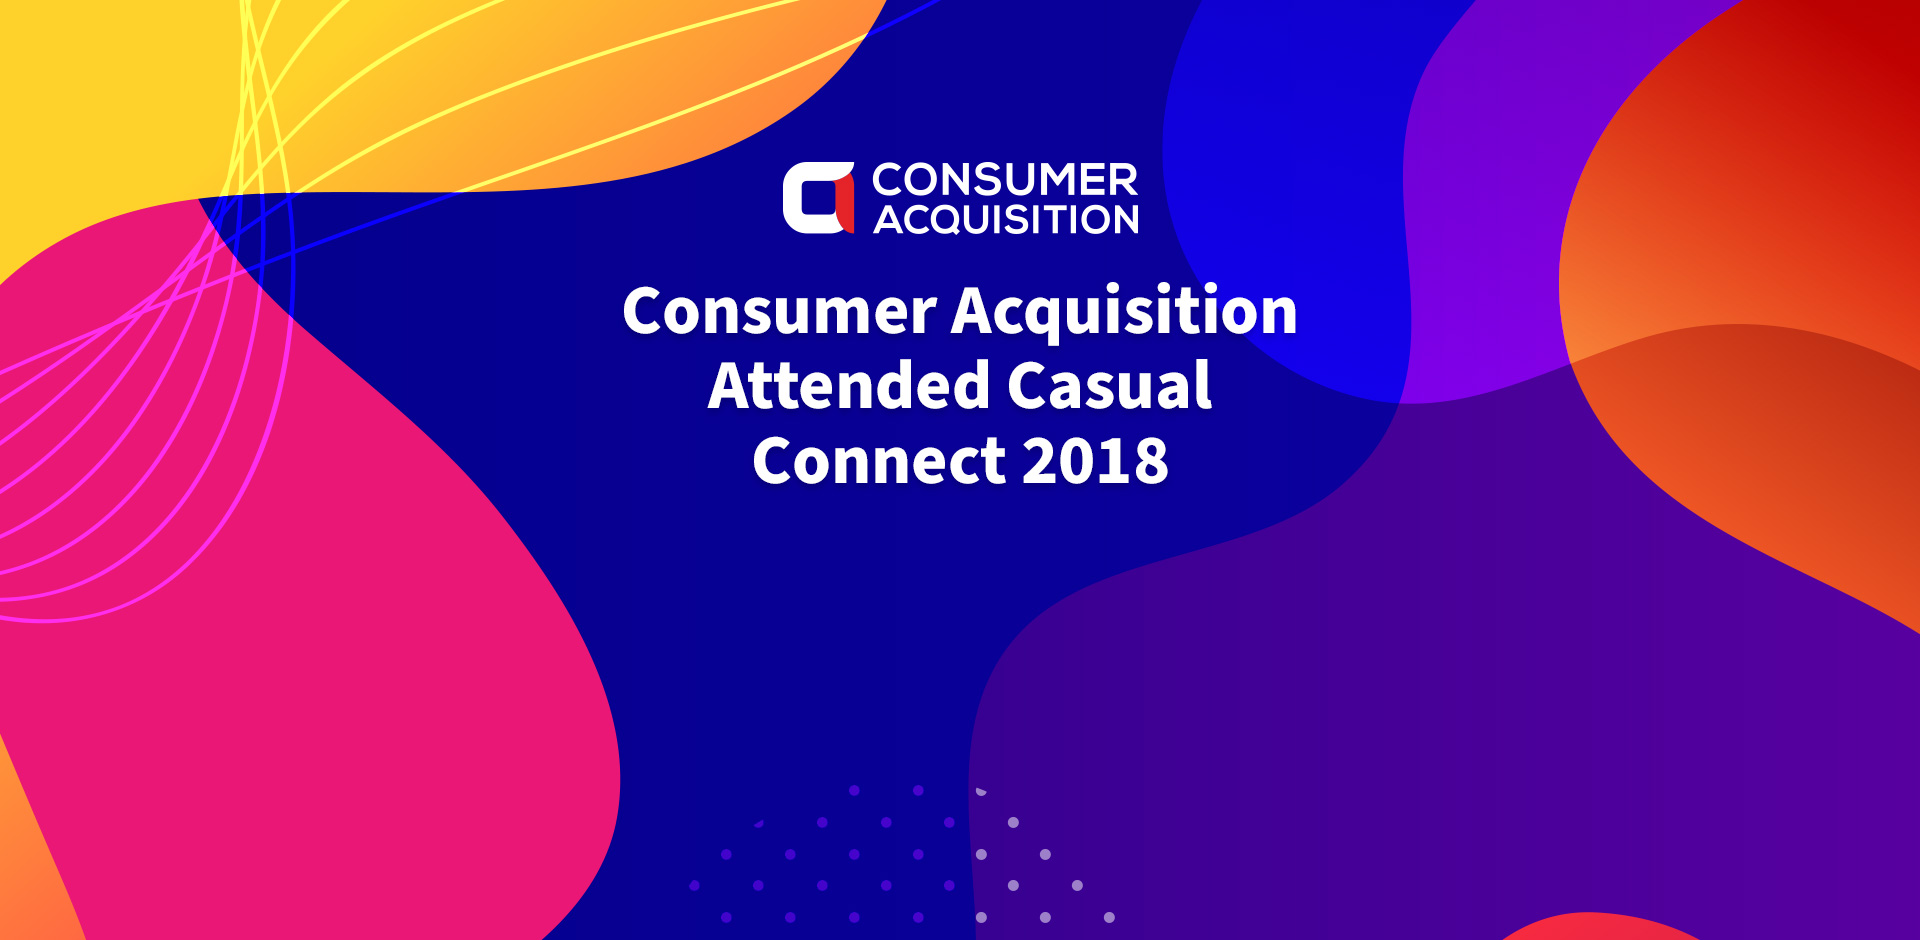 Consumer Acquisition Attended Casual Connect 2018